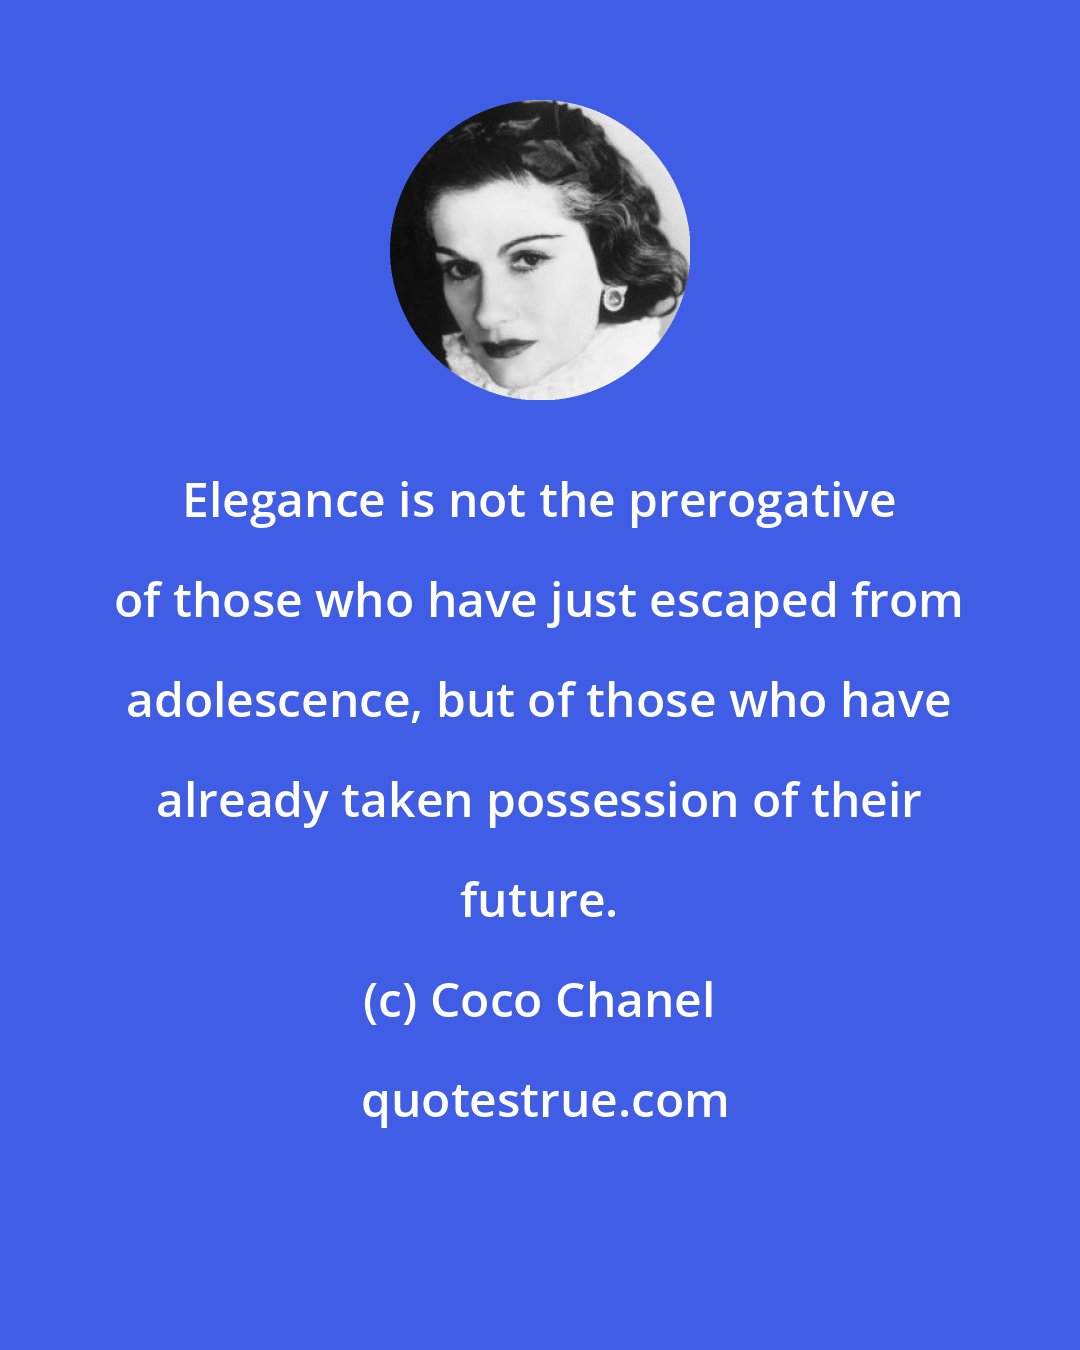 Coco Chanel: Elegance is not the prerogative of those who have just escaped from adolescence, but of those who have already taken possession of their future.